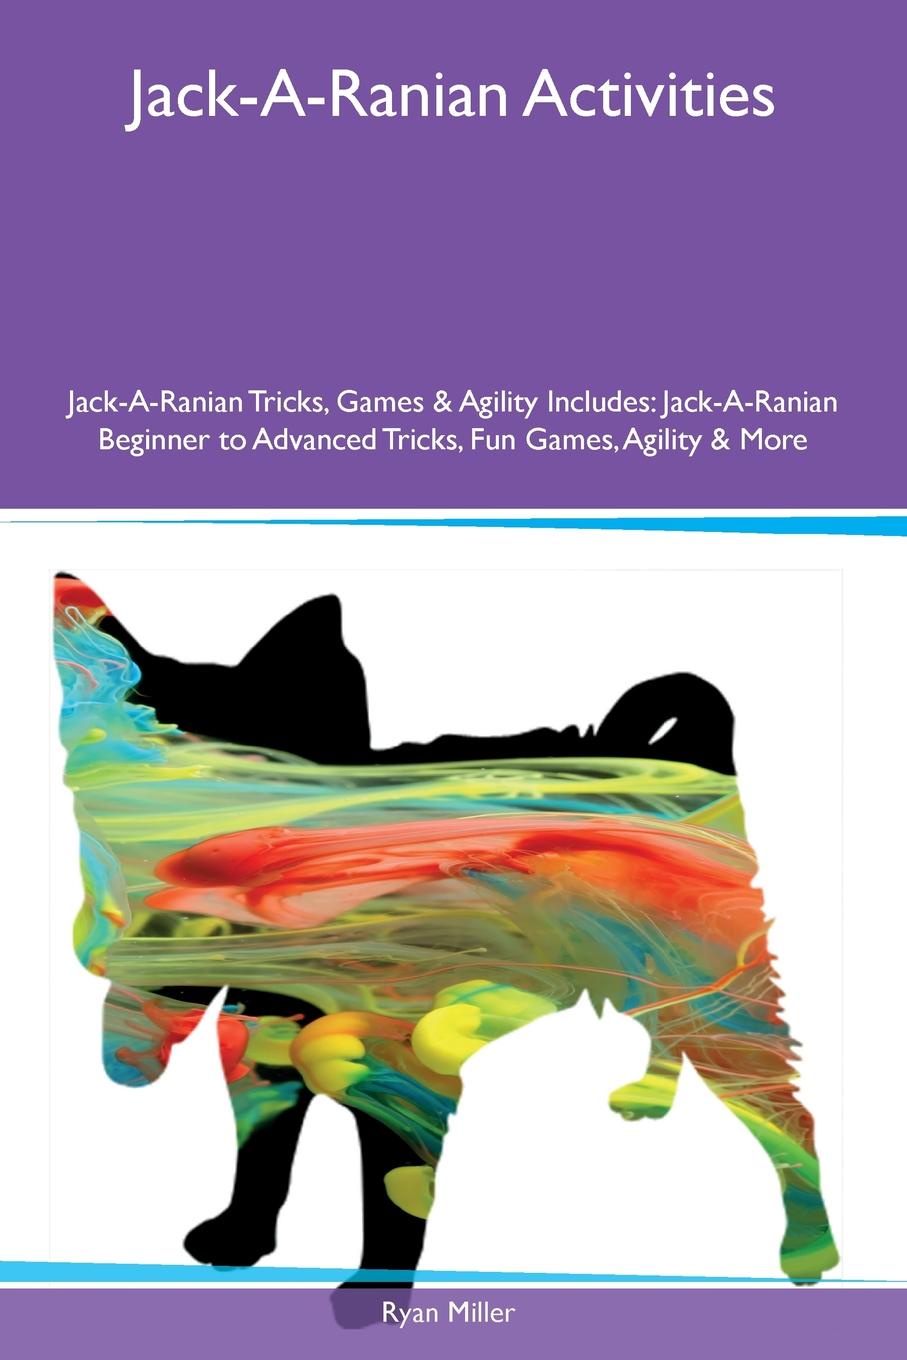 Jack-A-Ranian Activities Jack-A-Ranian Tricks, Games & Agility Includes. Jack-A-Ranian Beginner to Advanced Tricks, Fun Games, Agility & More